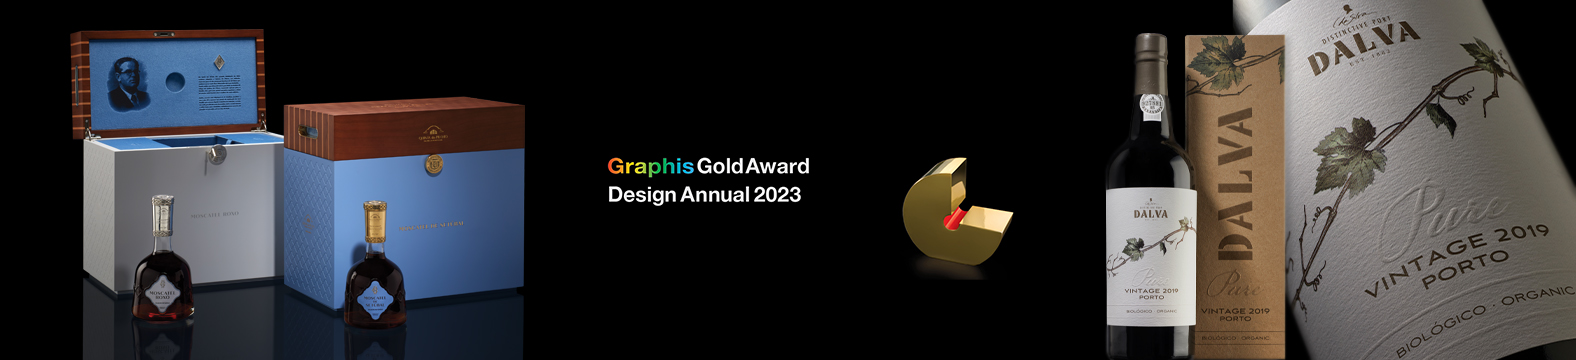 Omdesign was multi-awarded at US Graphis